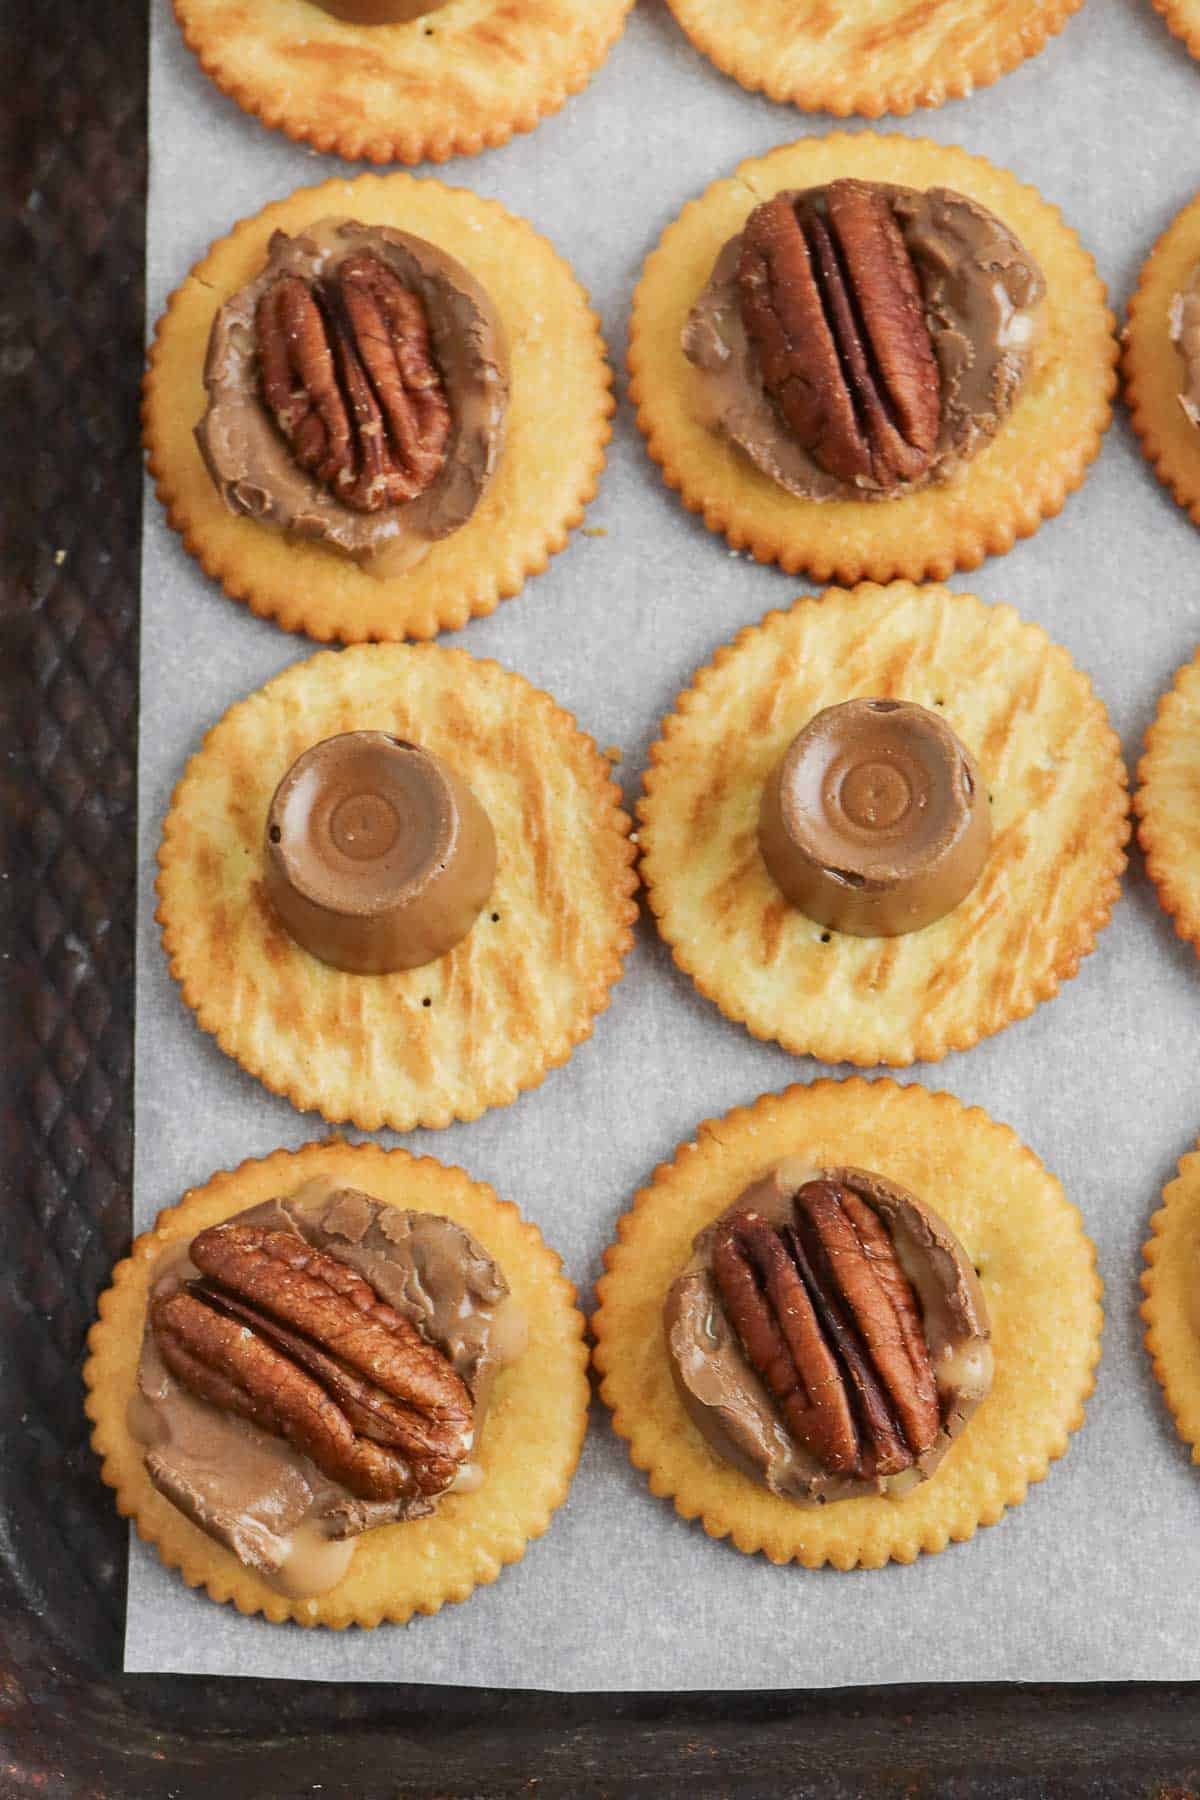 ritz crackers topped with a Rolo candy and pecan half on some.